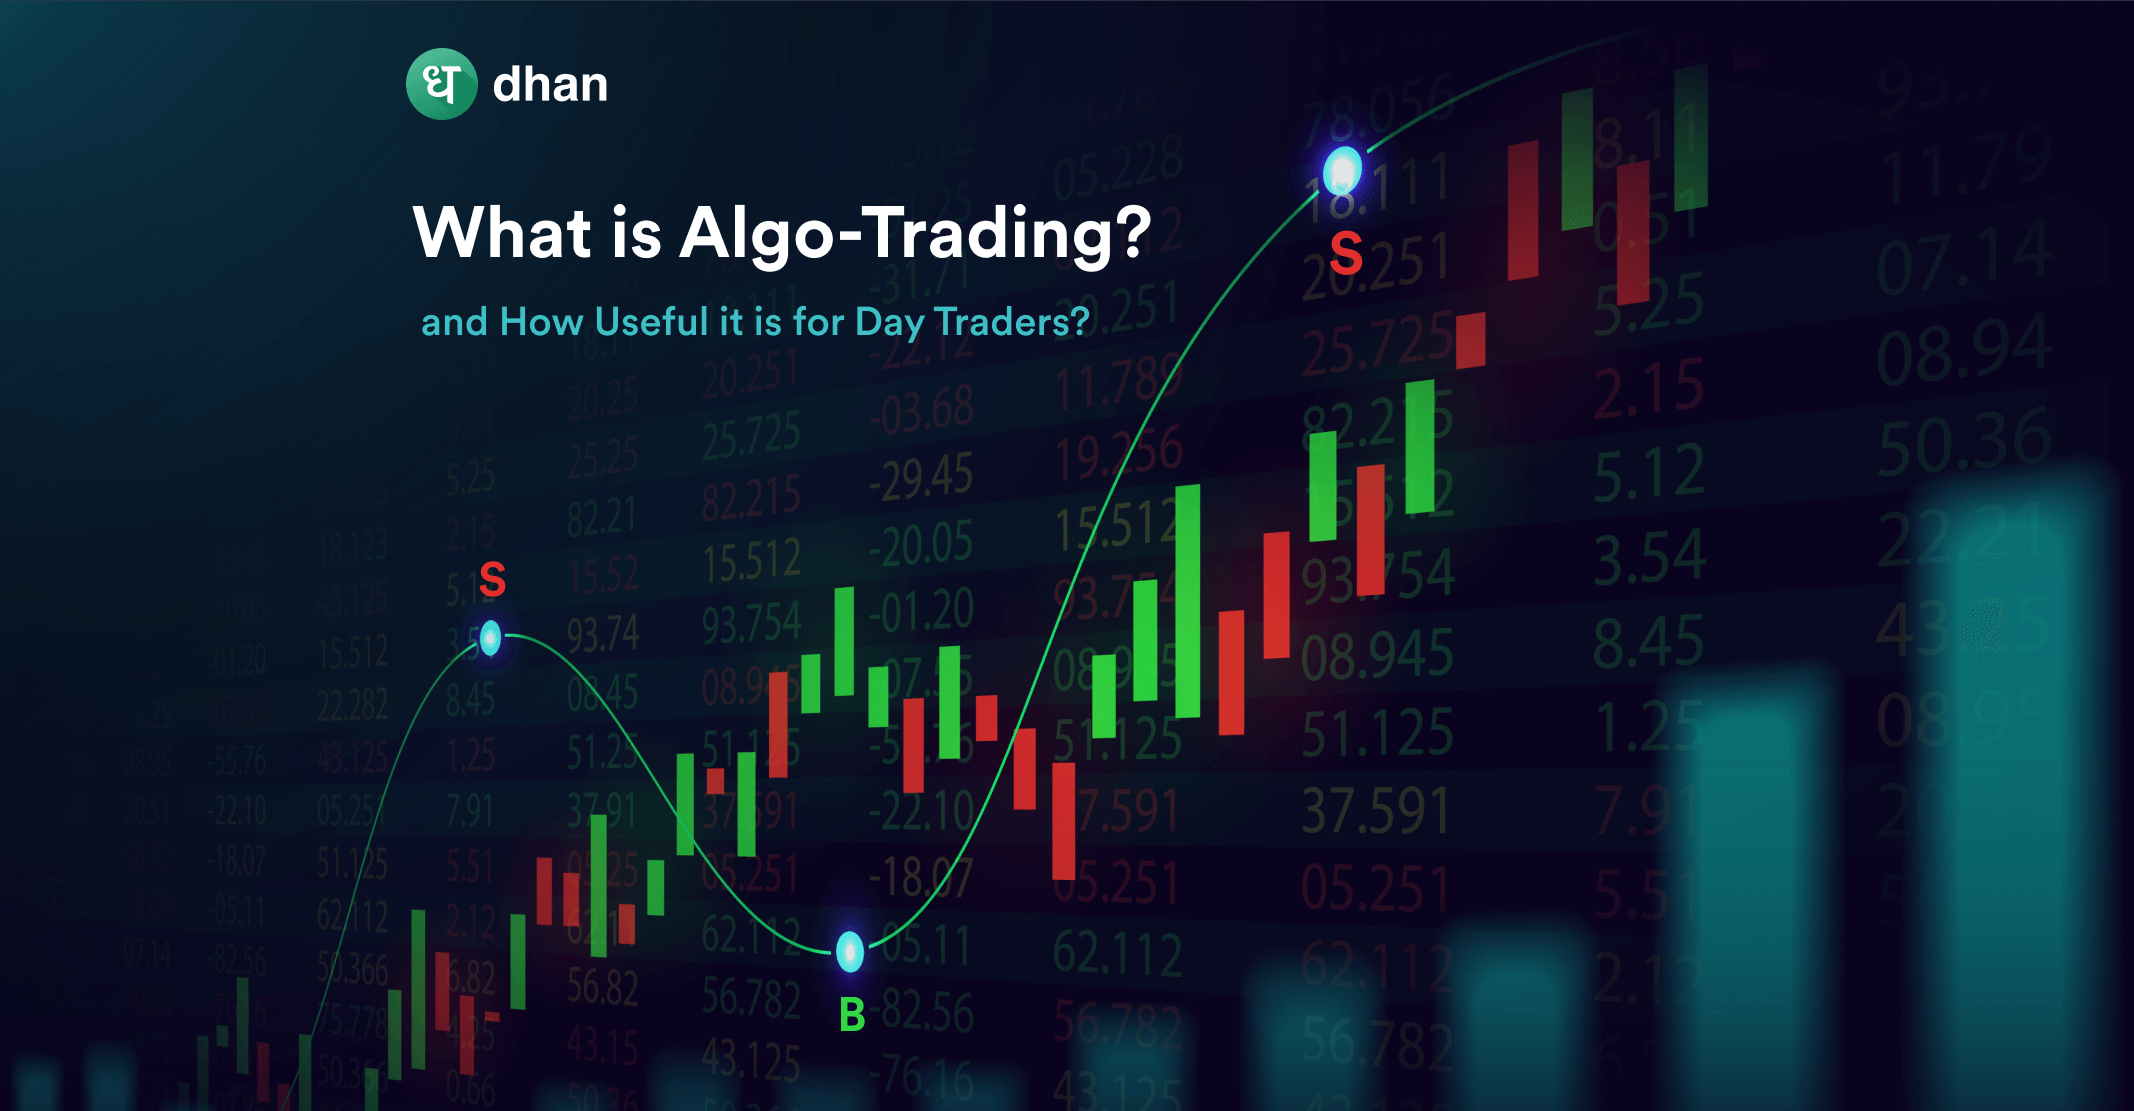 What is Algo-Trading and How Useful Is It for Day Traders?